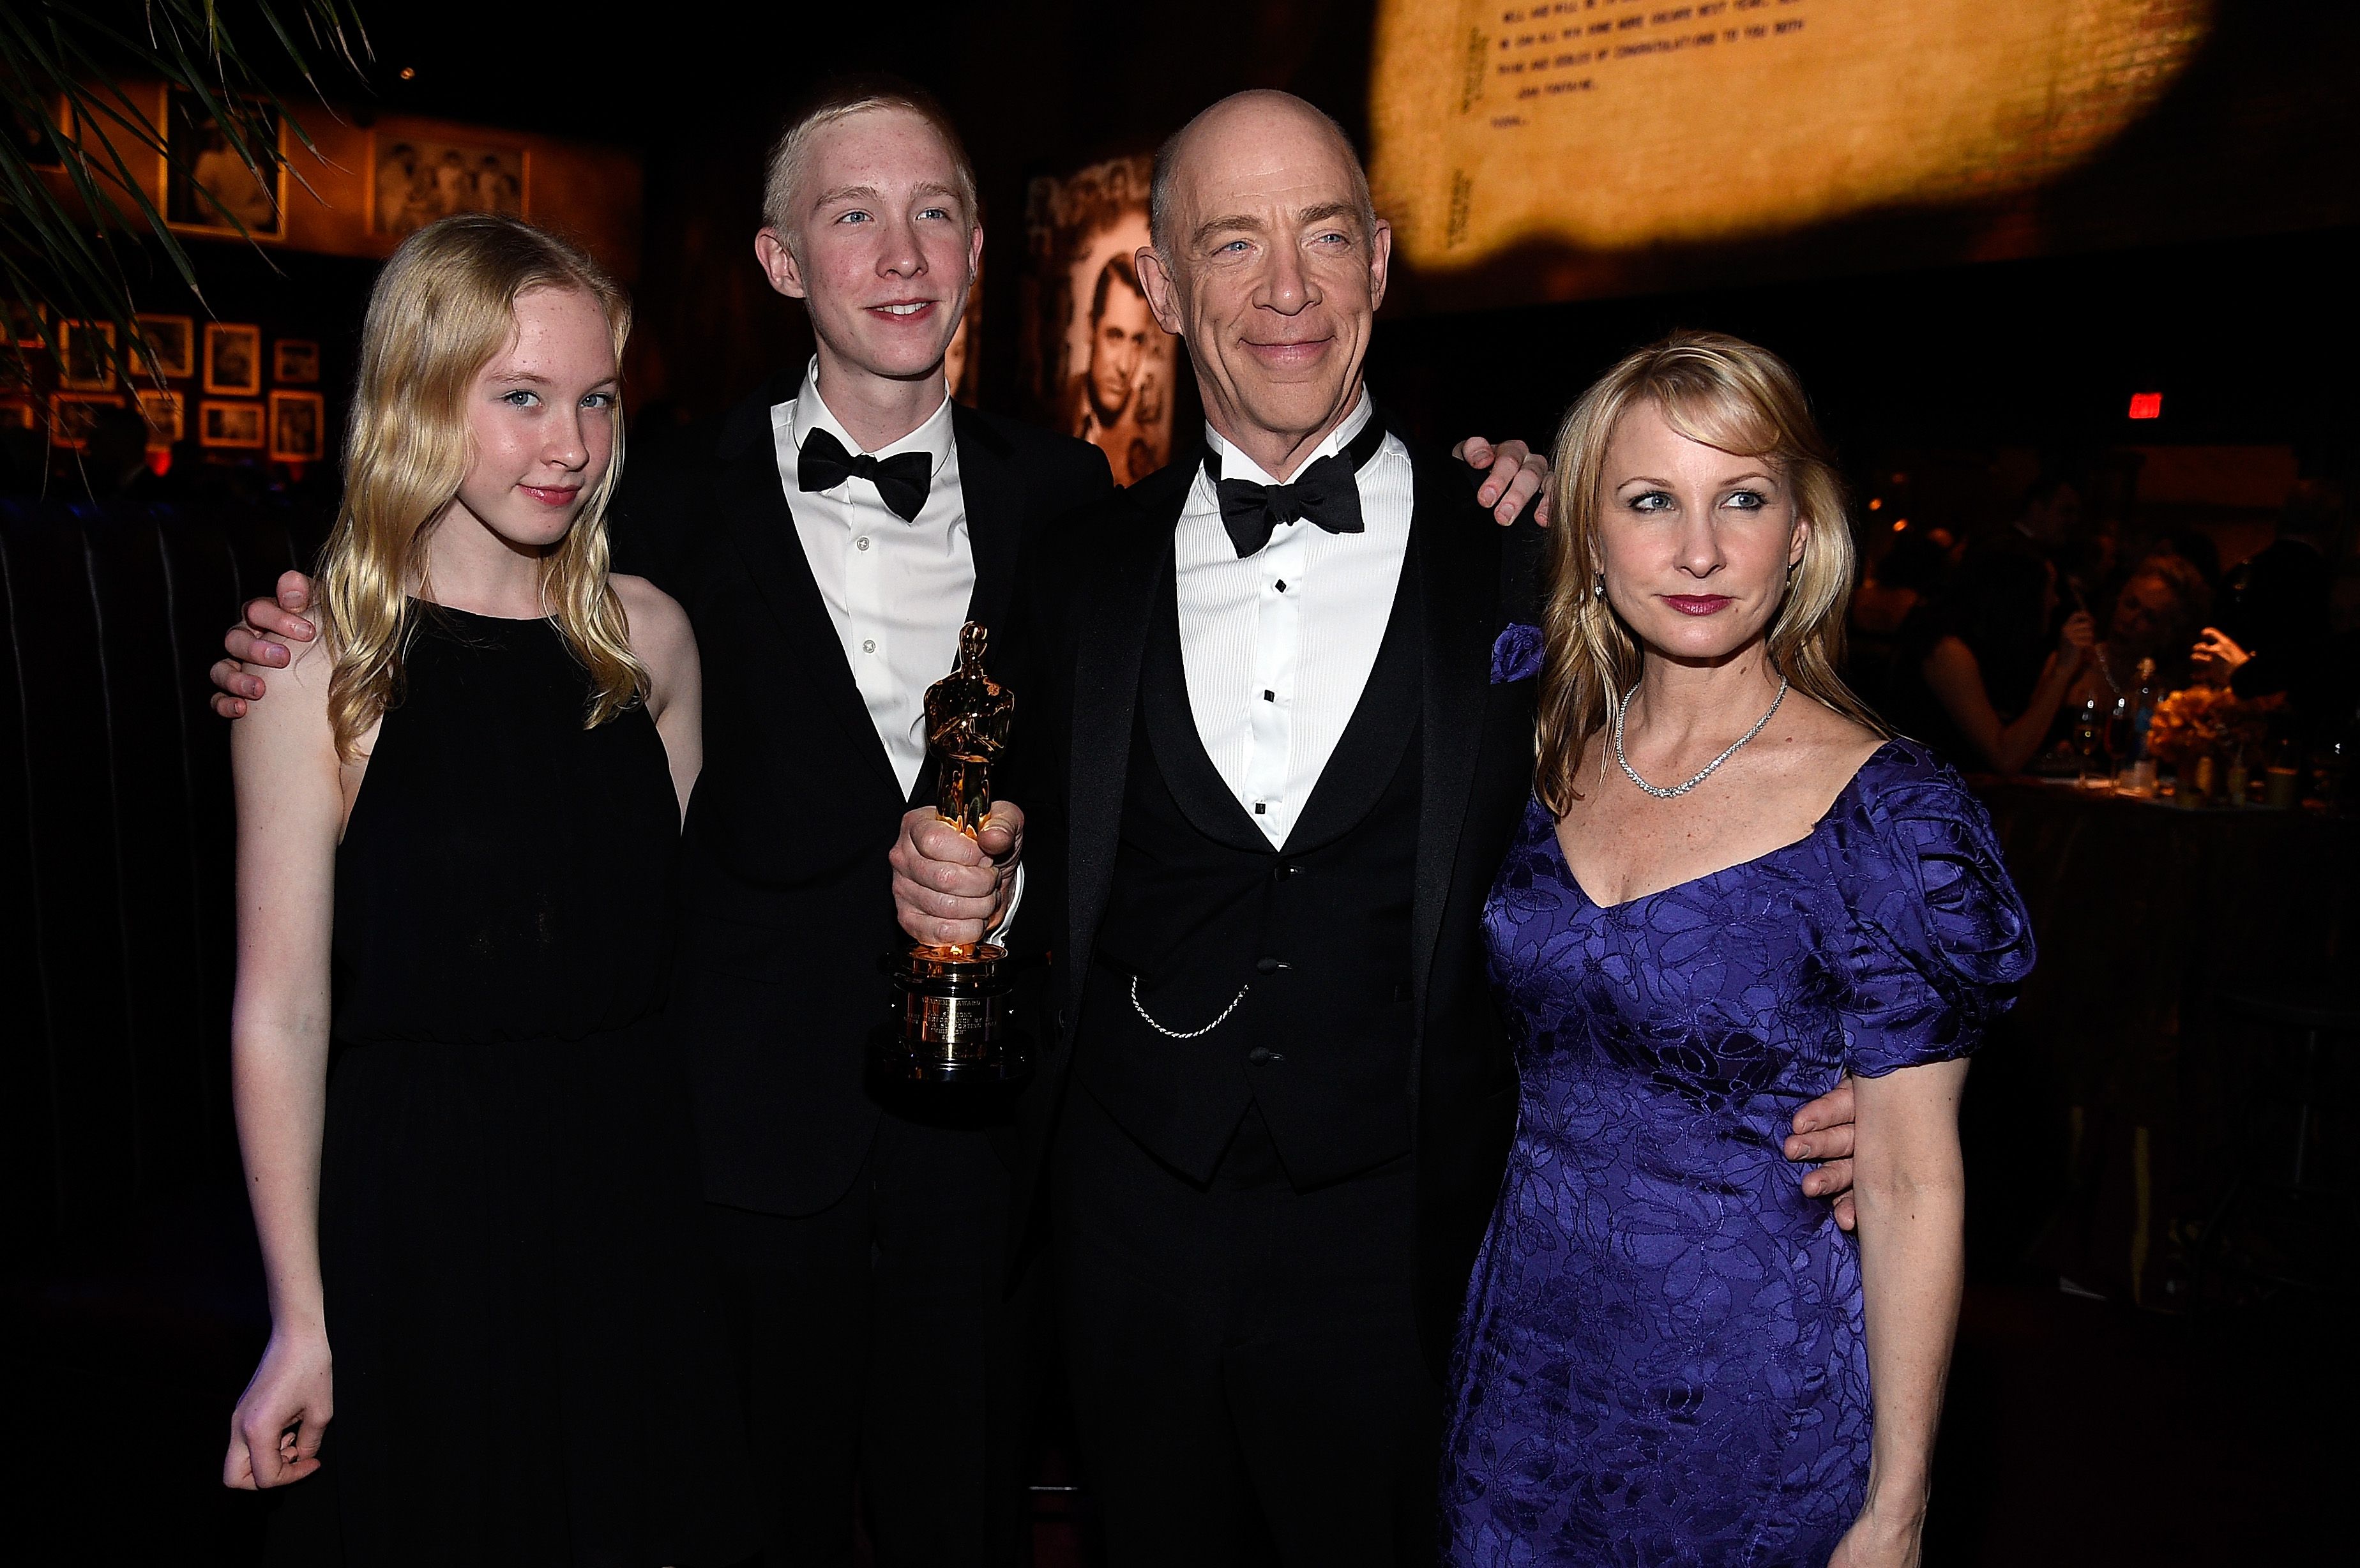 J.K. Simmons and family at the 87th Annual Academy Awards Governors Ball on February 22, 2015 in Hollywood, California | Photo: Getty Images